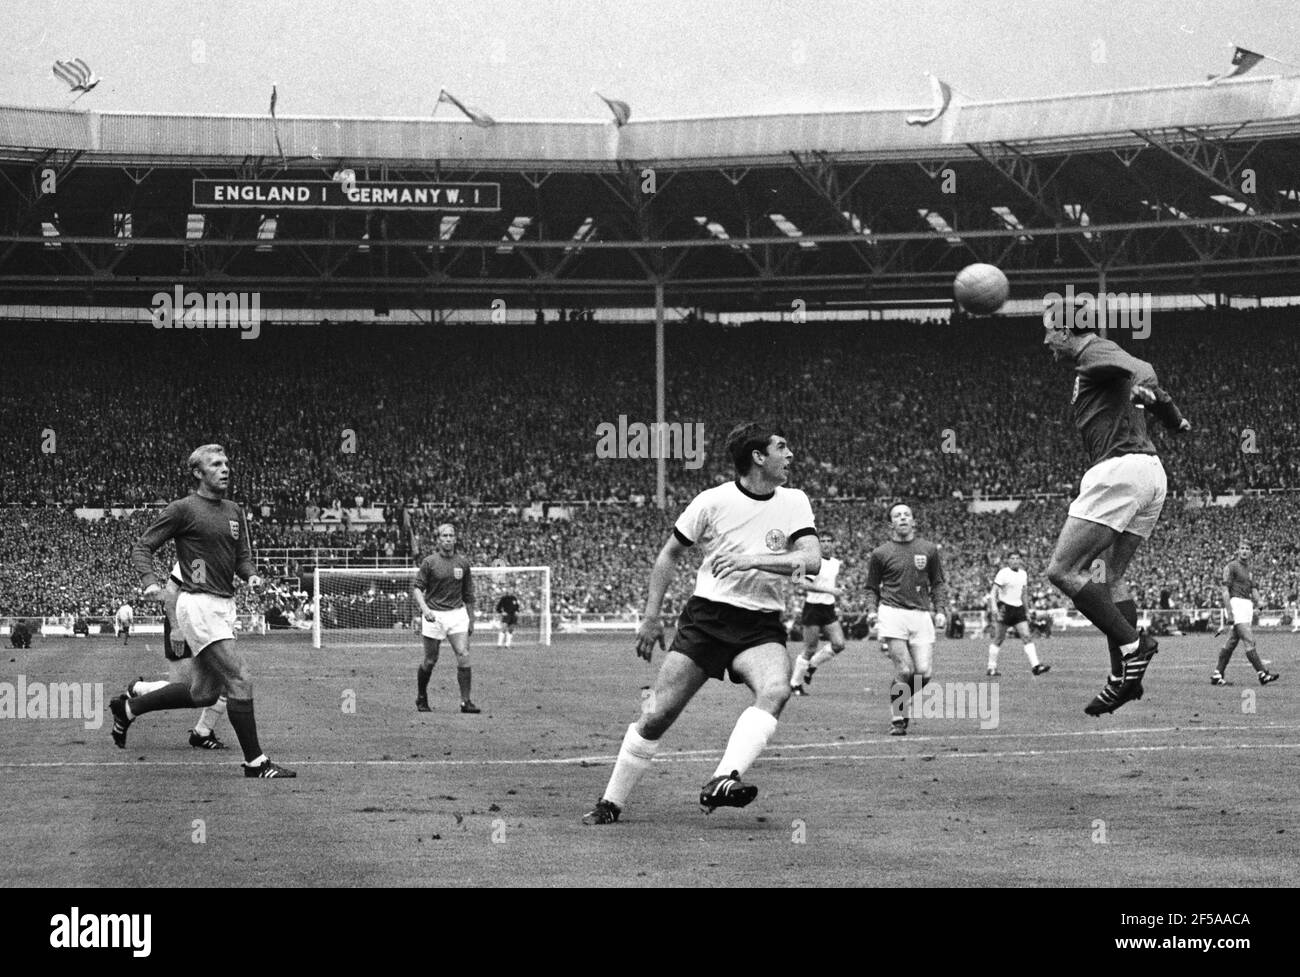 England versus West Germany 1966 World Cup Final, Wembley Stadium 20th minute of the first half.  Ray Wilson of England heads the ball to Captain Bobby Moore past Lothar Emmerich of West Germany  Photo by Tony Henshaw Archive Stock Photo